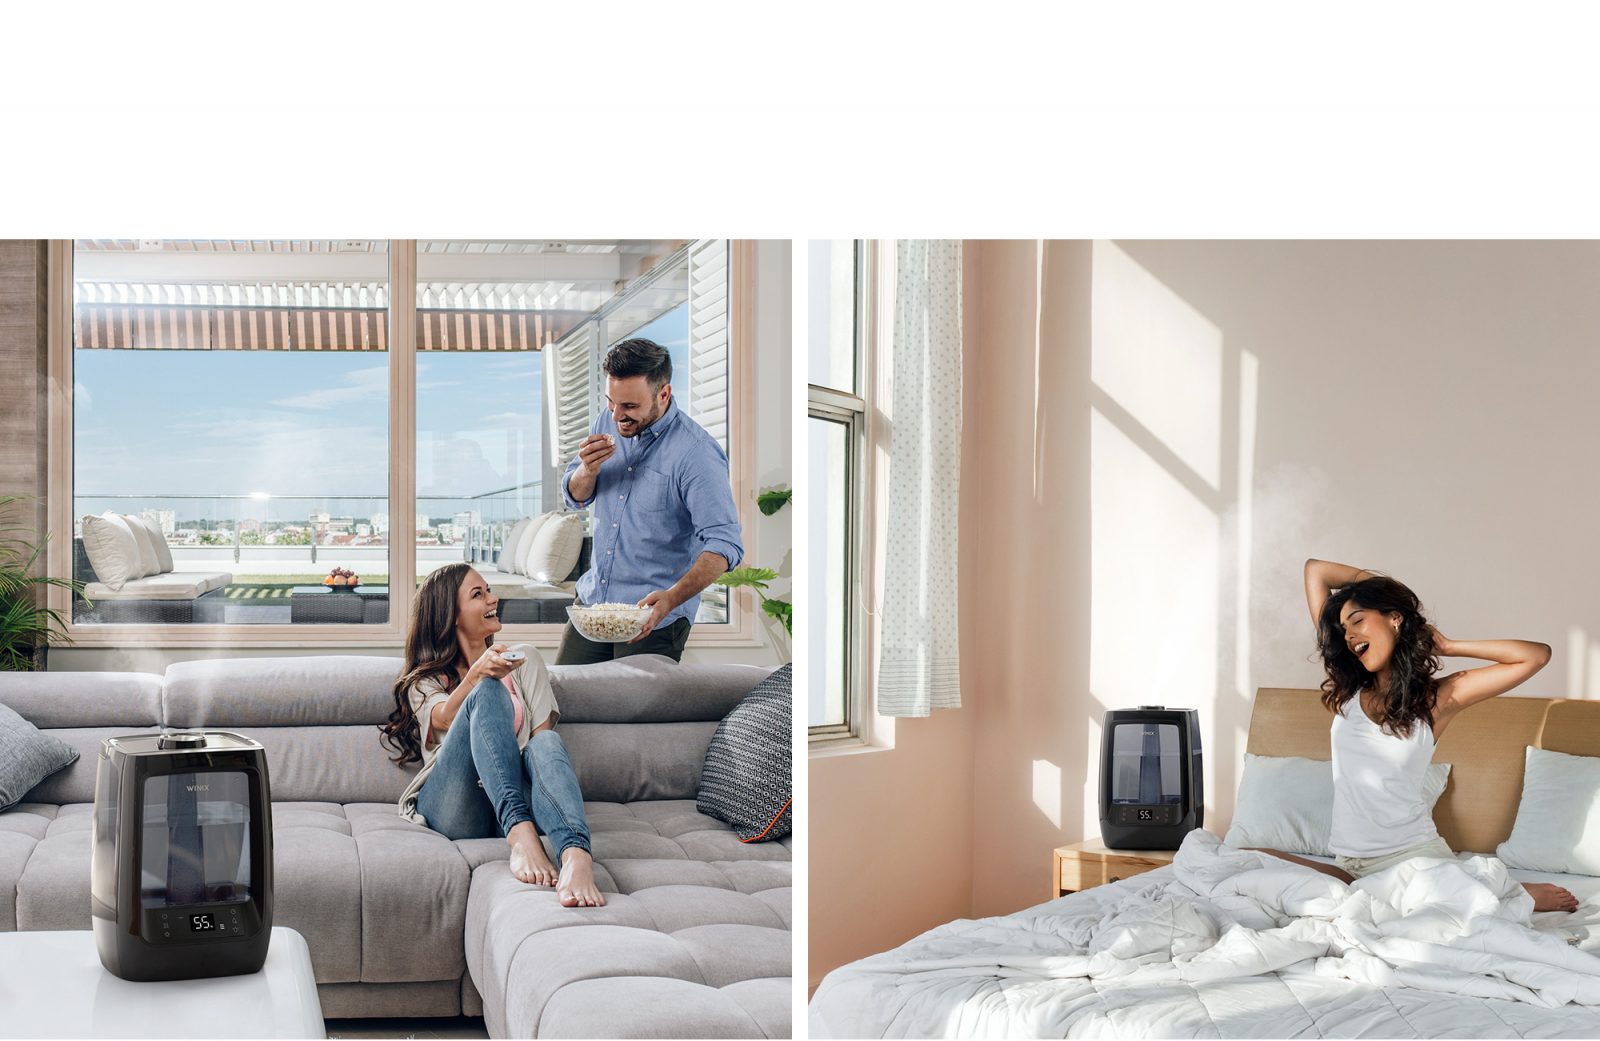 Two images of L200 humidifier, one of a couple relaxing with the L200 humidifier on coffee table and other image of L200 humidifier on nightstand next to woman waking up